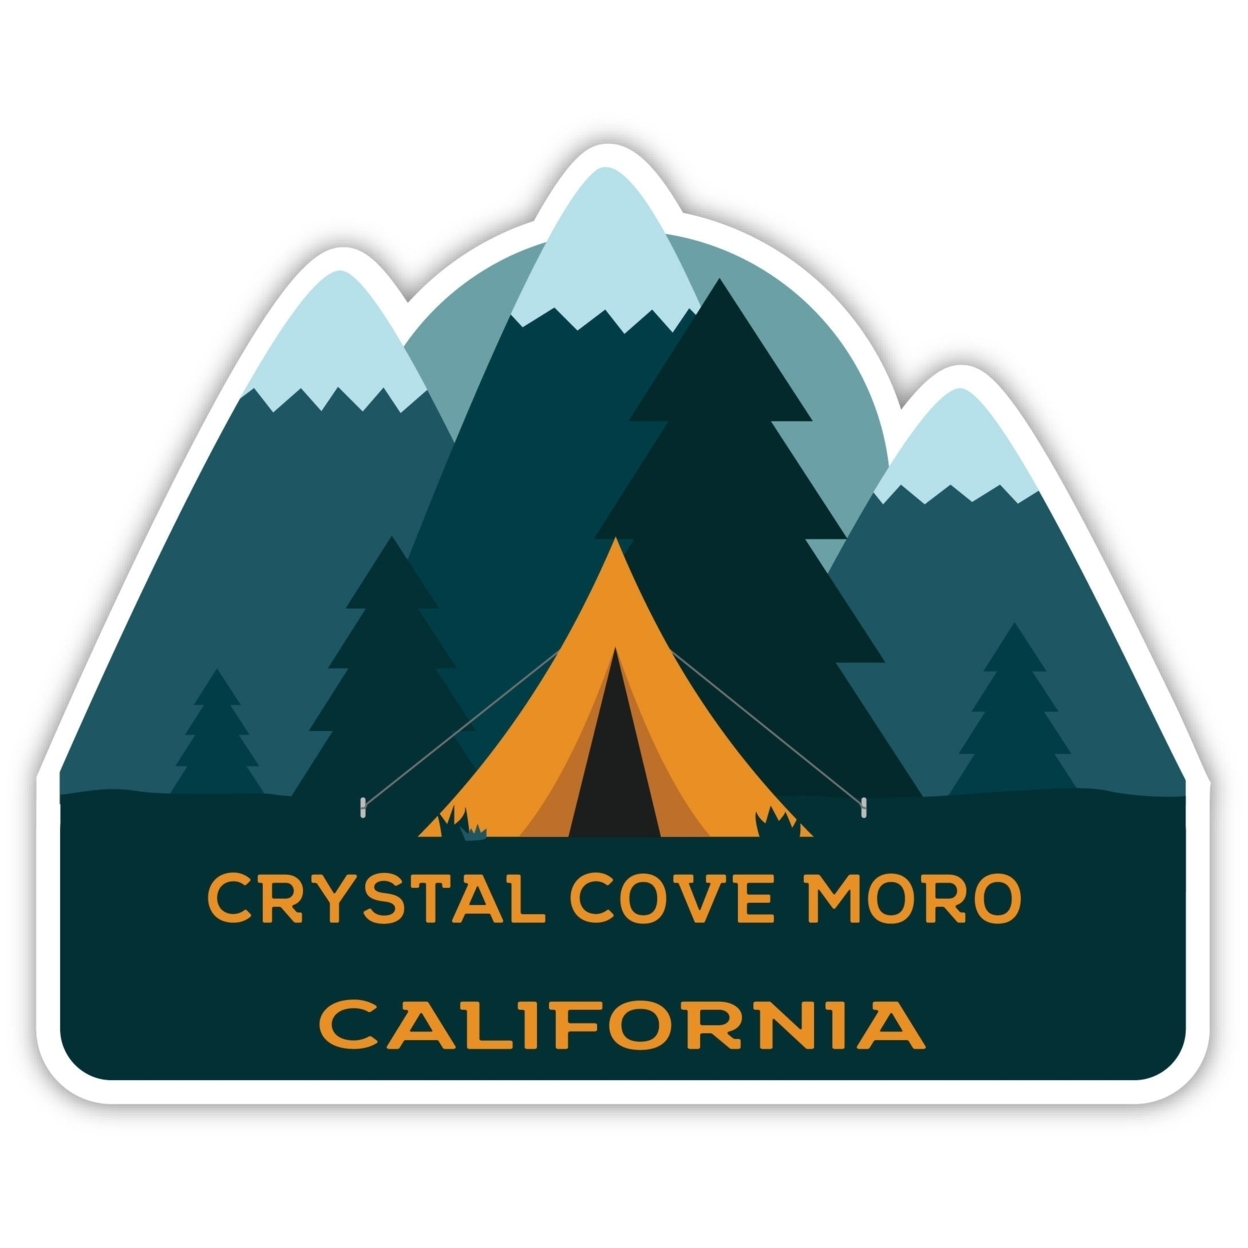 Crystal Cove Moro California Souvenir Decorative Stickers (Choose Theme And Size) - 4-Pack, 6-Inch, Tent